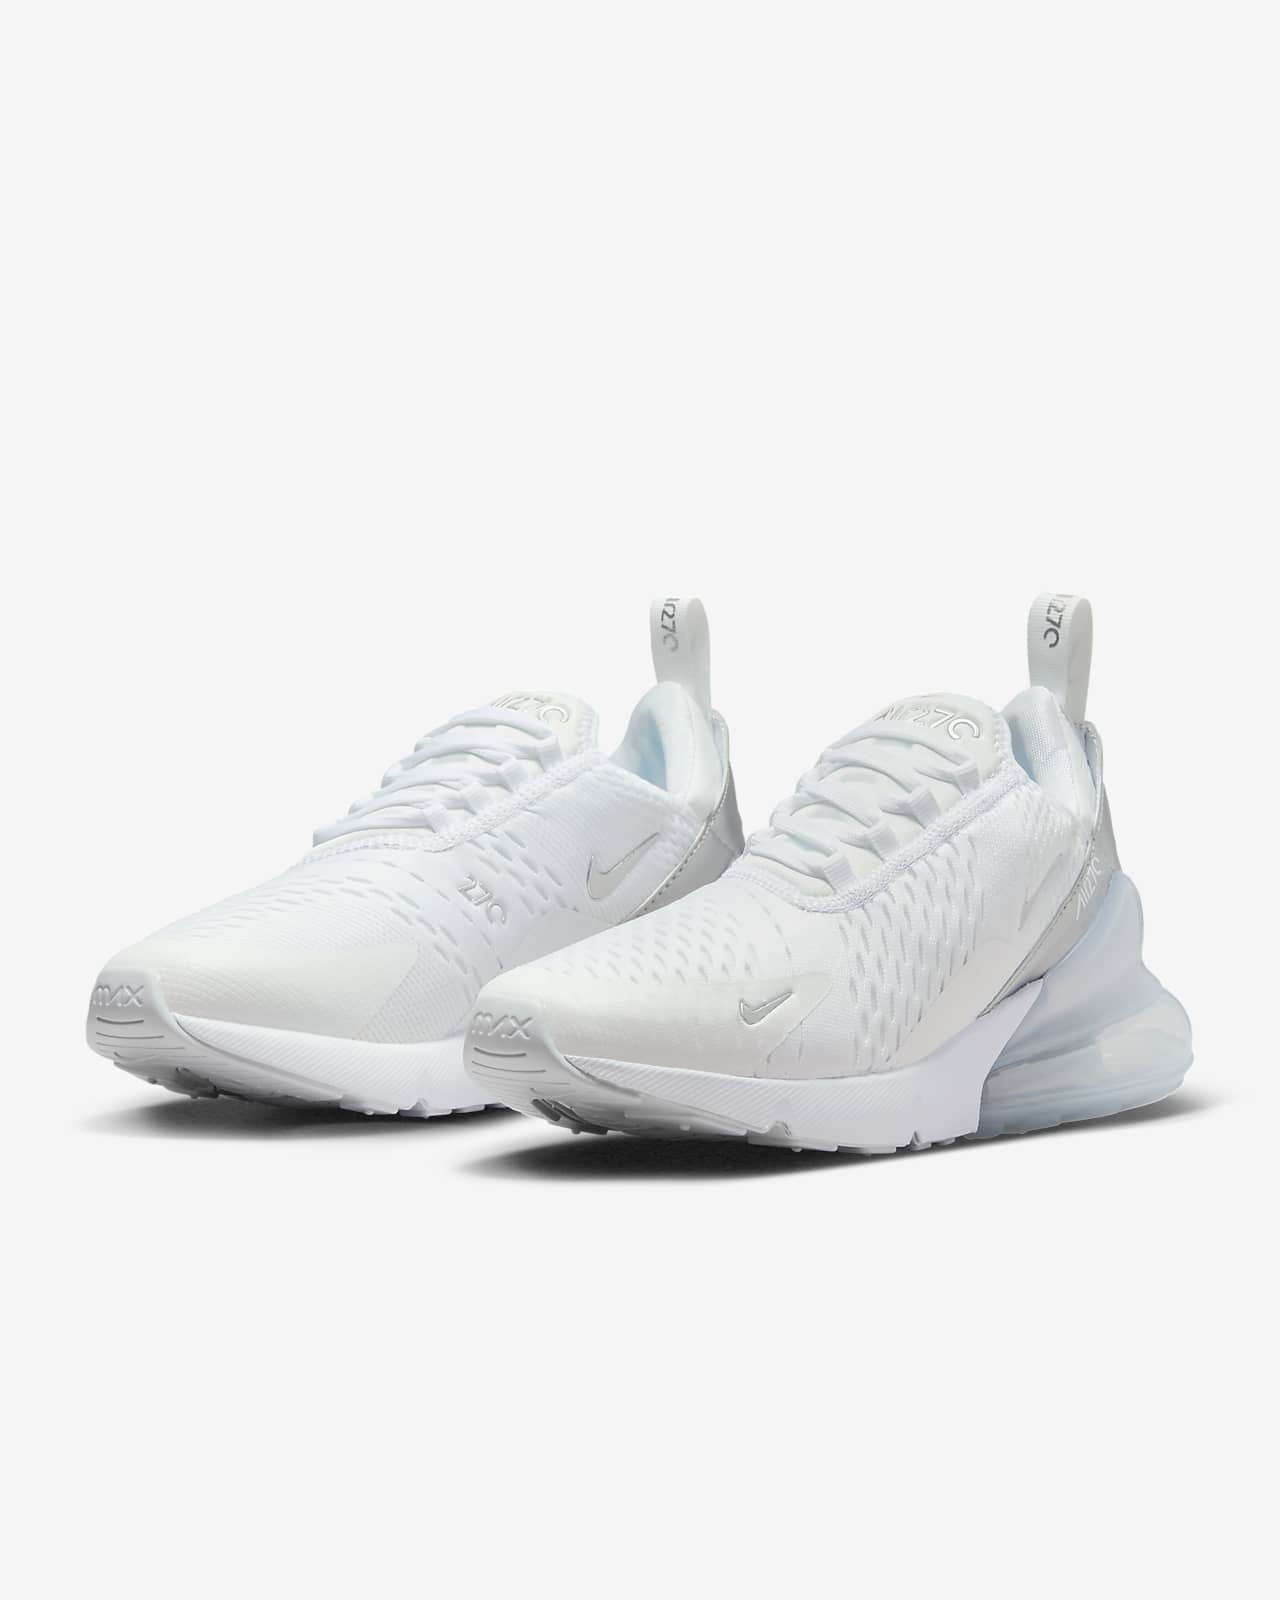 size 9 women's nike air max 270 shoes